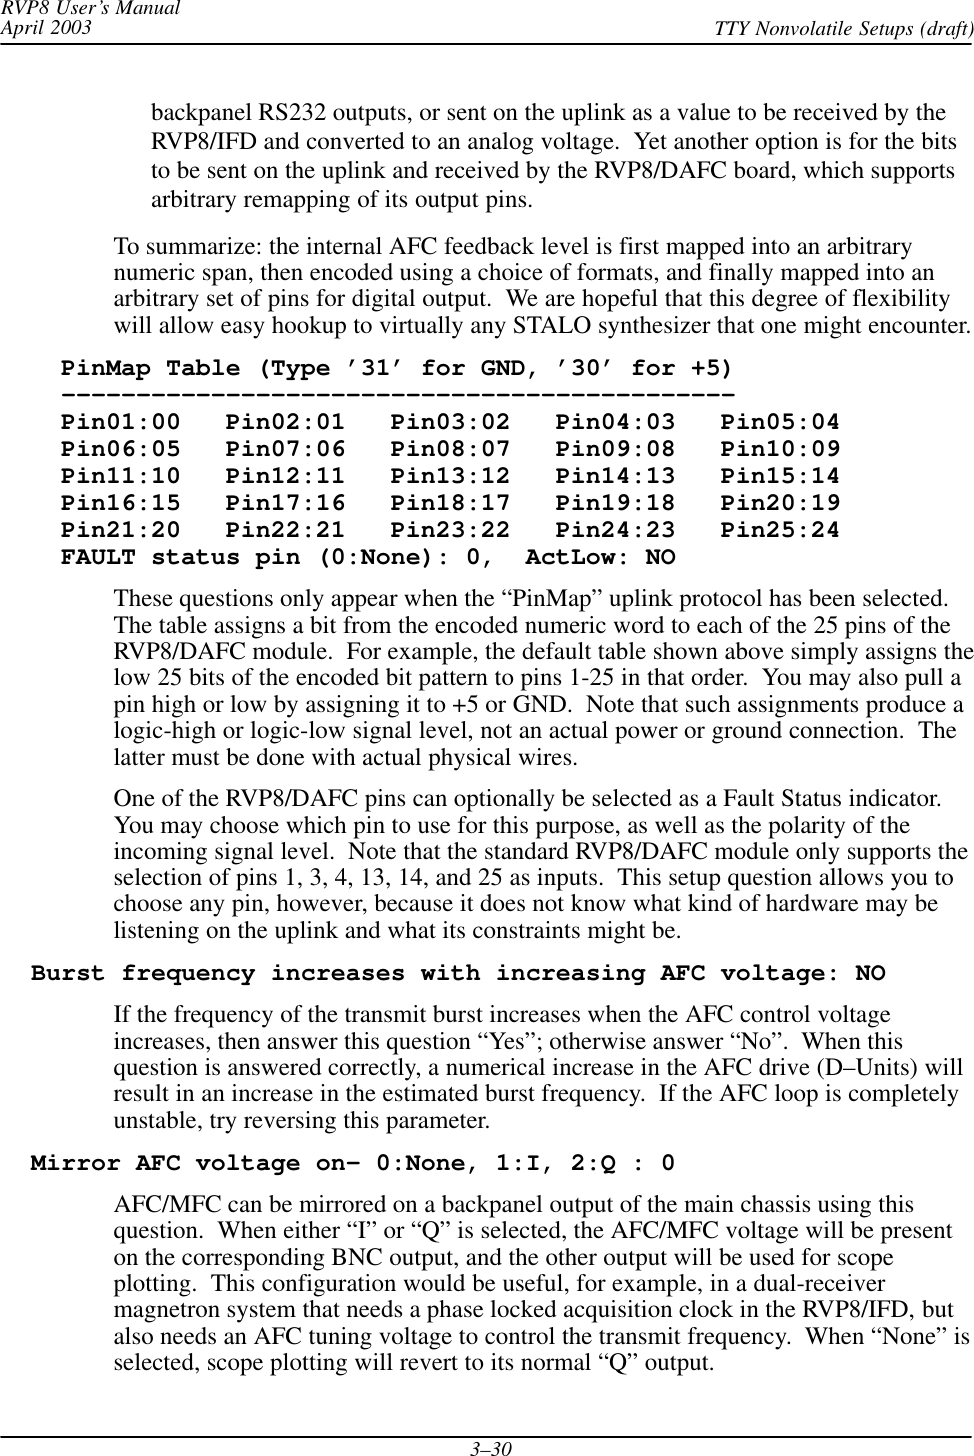 RVP8 User’s ManualApril 2003 TTY Nonvolatile Setups (draft)3–30backpanel RS232 outputs, or sent on the uplink as a value to be received by theRVP8/IFD and converted to an analog voltage.  Yet another option is for the bitsto be sent on the uplink and received by the RVP8/DAFC board, which supportsarbitrary remapping of its output pins.To summarize: the internal AFC feedback level is first mapped into an arbitrarynumeric span, then encoded using a choice of formats, and finally mapped into anarbitrary set of pins for digital output.  We are hopeful that this degree of flexibilitywill allow easy hookup to virtually any STALO synthesizer that one might encounter.    PinMap Table (Type ’31’ for GND, ’30’ for +5)    –––––––––––––––––––––––––––––––––––––––––––––    Pin01:00   Pin02:01   Pin03:02   Pin04:03   Pin05:04    Pin06:05   Pin07:06   Pin08:07   Pin09:08   Pin10:09    Pin11:10   Pin12:11   Pin13:12   Pin14:13   Pin15:14    Pin16:15   Pin17:16   Pin18:17   Pin19:18   Pin20:19    Pin21:20   Pin22:21   Pin23:22   Pin24:23   Pin25:24    FAULT status pin (0:None): 0,  ActLow: NOThese questions only appear when the “PinMap” uplink protocol has been selected.The table assigns a bit from the encoded numeric word to each of the 25 pins of theRVP8/DAFC module.  For example, the default table shown above simply assigns thelow 25 bits of the encoded bit pattern to pins 1-25 in that order.  You may also pull apin high or low by assigning it to +5 or GND.  Note that such assignments produce alogic-high or logic-low signal level, not an actual power or ground connection.  Thelatter must be done with actual physical wires.One of the RVP8/DAFC pins can optionally be selected as a Fault Status indicator.You may choose which pin to use for this purpose, as well as the polarity of theincoming signal level.  Note that the standard RVP8/DAFC module only supports theselection of pins 1, 3, 4, 13, 14, and 25 as inputs.  This setup question allows you tochoose any pin, however, because it does not know what kind of hardware may belistening on the uplink and what its constraints might be.  Burst frequency increases with increasing AFC voltage: NOIf the frequency of the transmit burst increases when the AFC control voltageincreases, then answer this question “Yes”; otherwise answer “No”.  When thisquestion is answered correctly, a numerical increase in the AFC drive (D–Units) willresult in an increase in the estimated burst frequency.  If the AFC loop is completelyunstable, try reversing this parameter.  Mirror AFC voltage on– 0:None, 1:I, 2:Q : 0AFC/MFC can be mirrored on a backpanel output of the main chassis using thisquestion.  When either “I” or “Q” is selected, the AFC/MFC voltage will be presenton the corresponding BNC output, and the other output will be used for scopeplotting.  This configuration would be useful, for example, in a dual-receivermagnetron system that needs a phase locked acquisition clock in the RVP8/IFD, butalso needs an AFC tuning voltage to control the transmit frequency.  When “None” isselected, scope plotting will revert to its normal “Q” output.